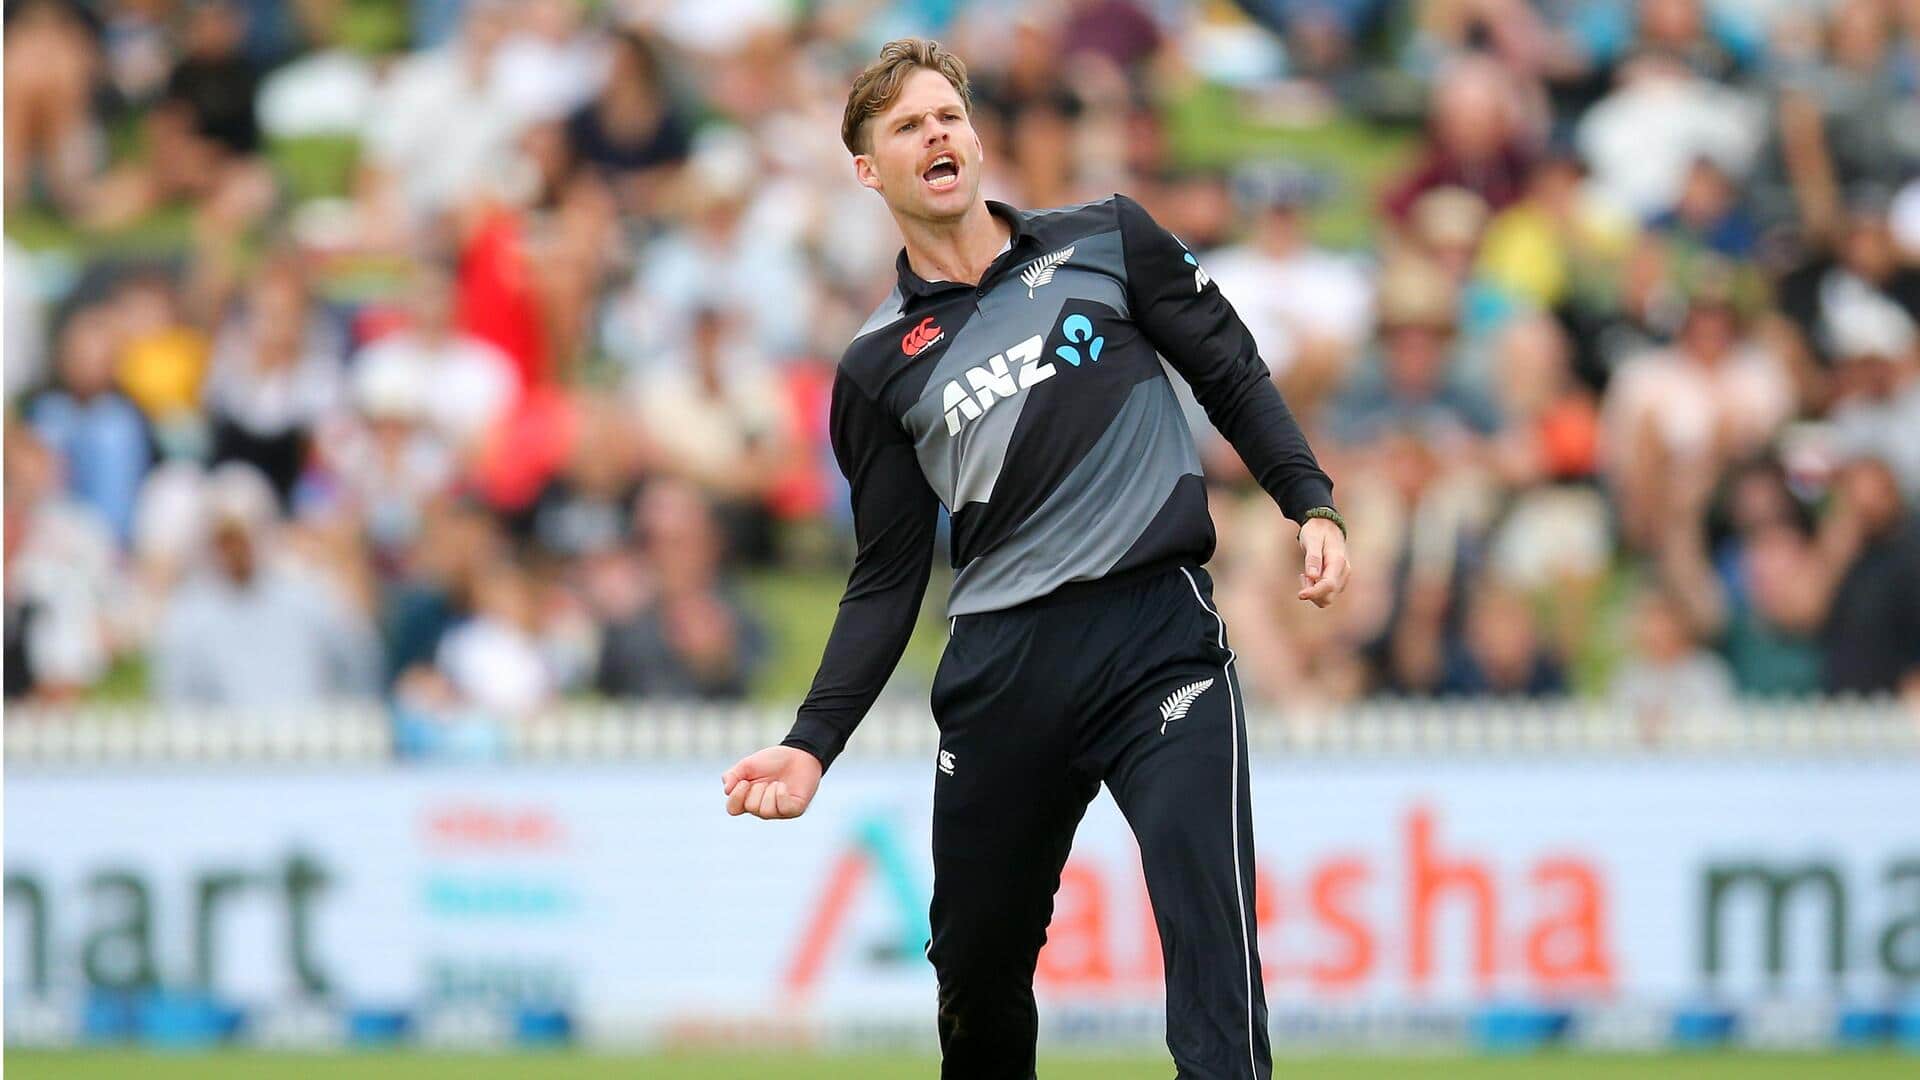 Lockie Ferguson becomes second-fastest NZ bowler to 50 T20I wickets